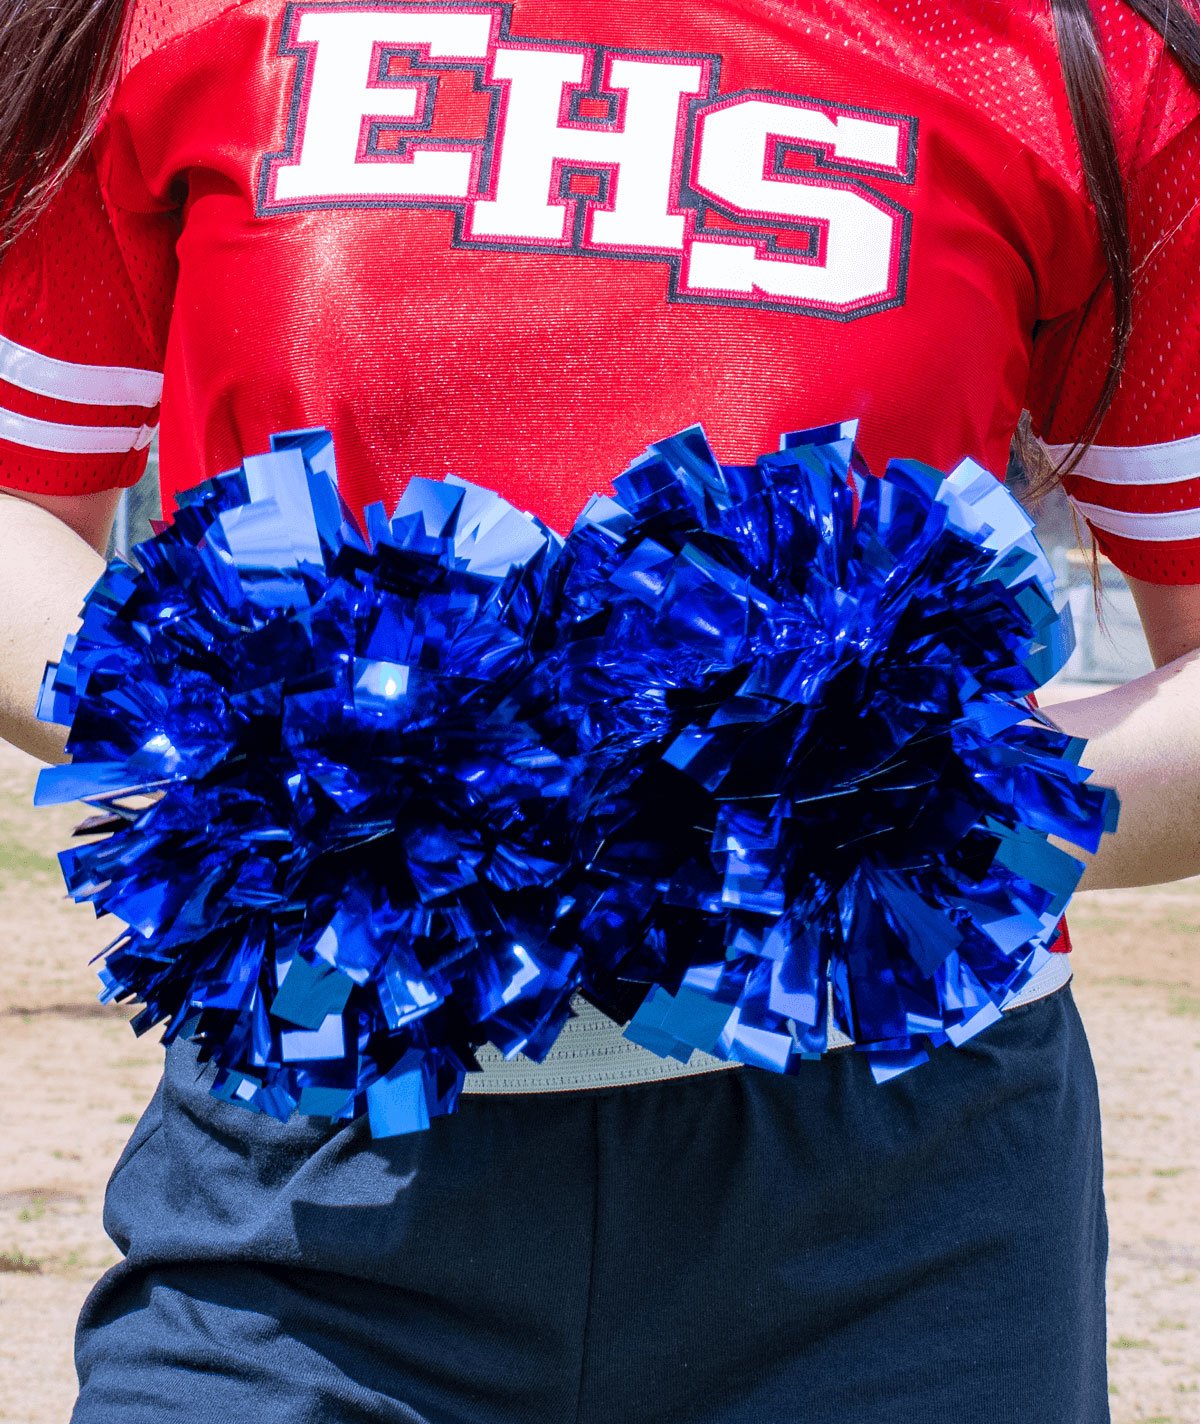 Chasse Solid Plastic Youth Pom | Omni Cheer